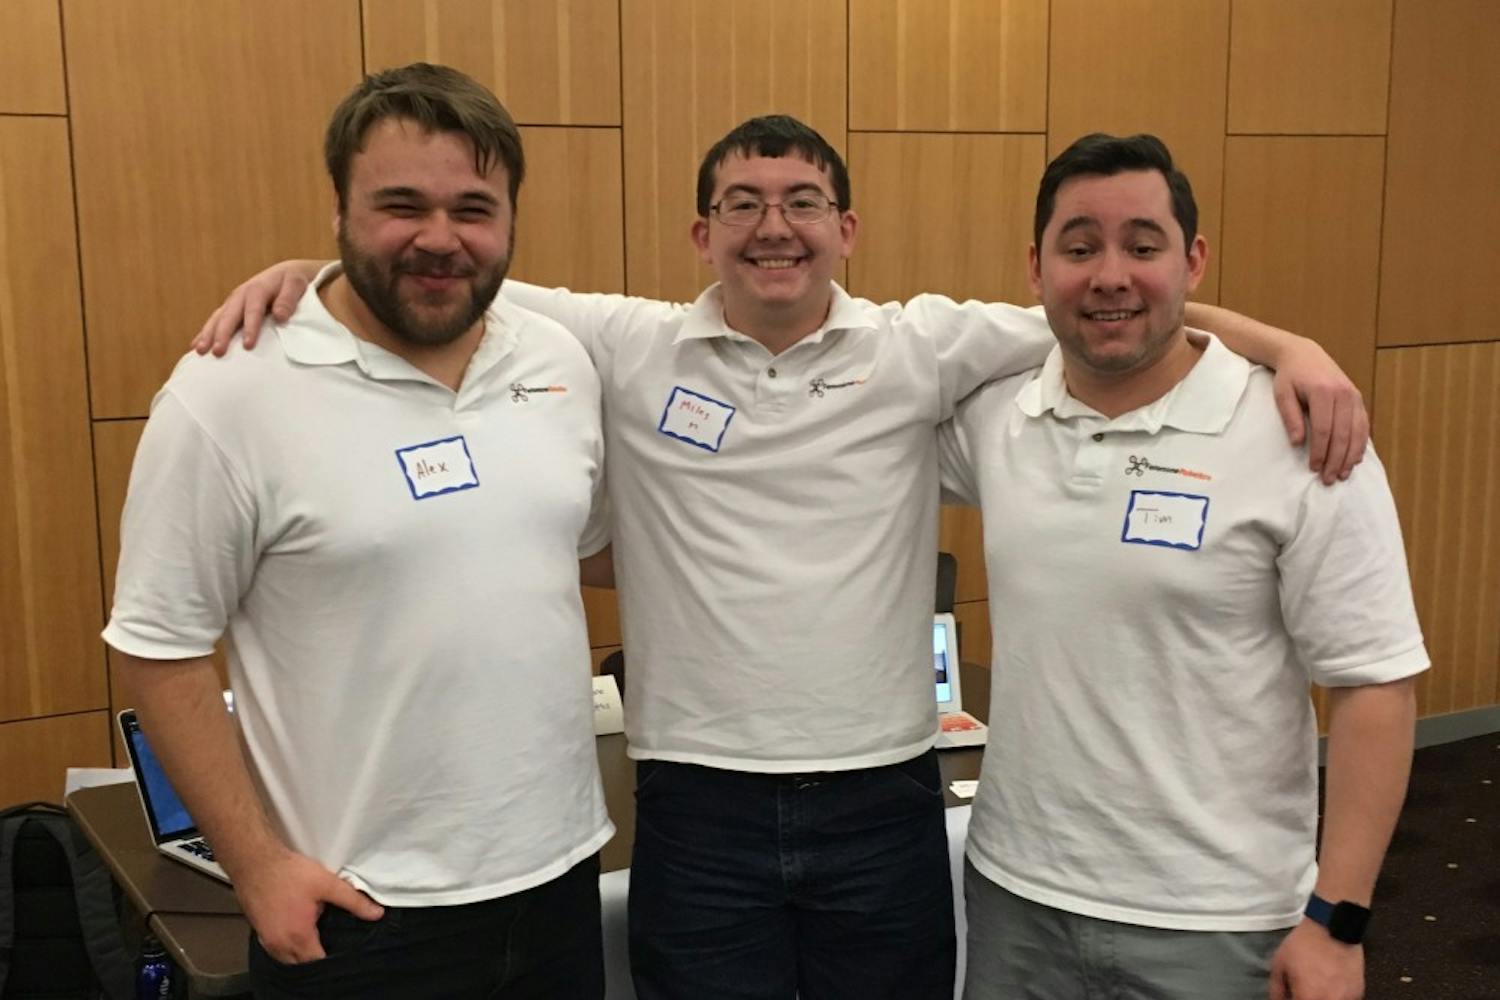 Feromone team members&nbsp;Alex Opstad,&nbsp;Miles Mabey and&nbsp;Tim Medina pose for a photo&nbsp;at ASU's Startup Summit on Sunday,&nbsp;Feb. 19 in Tempe